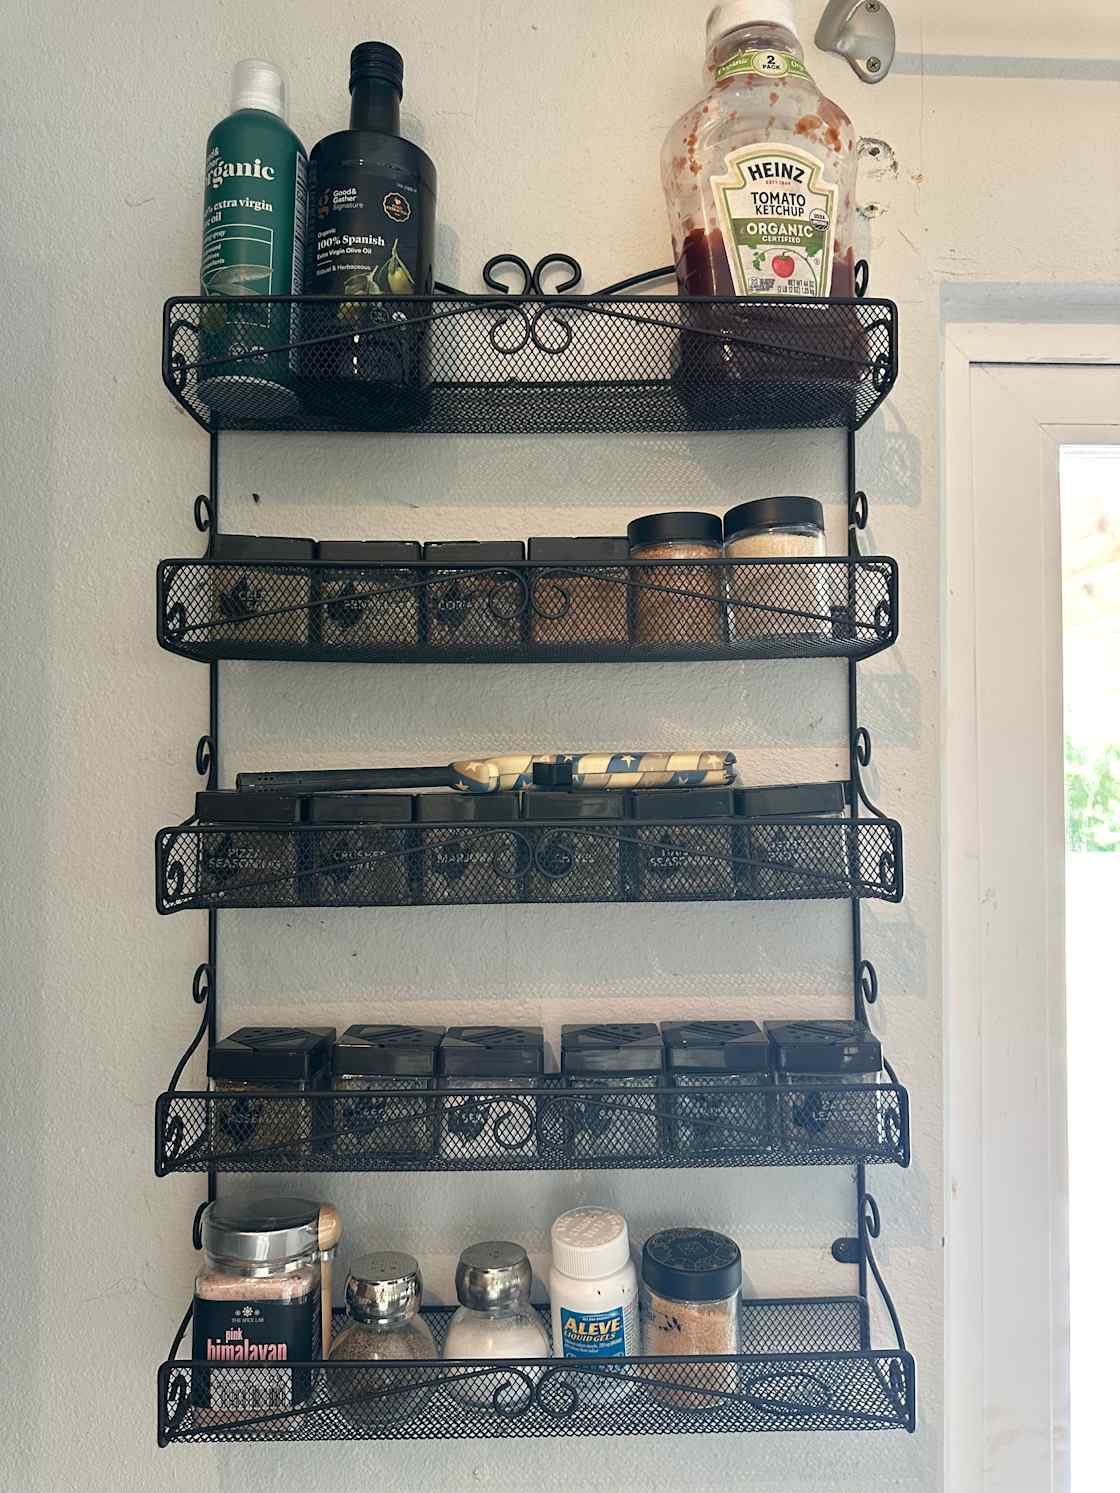 Full spice rack, contents may vary. 